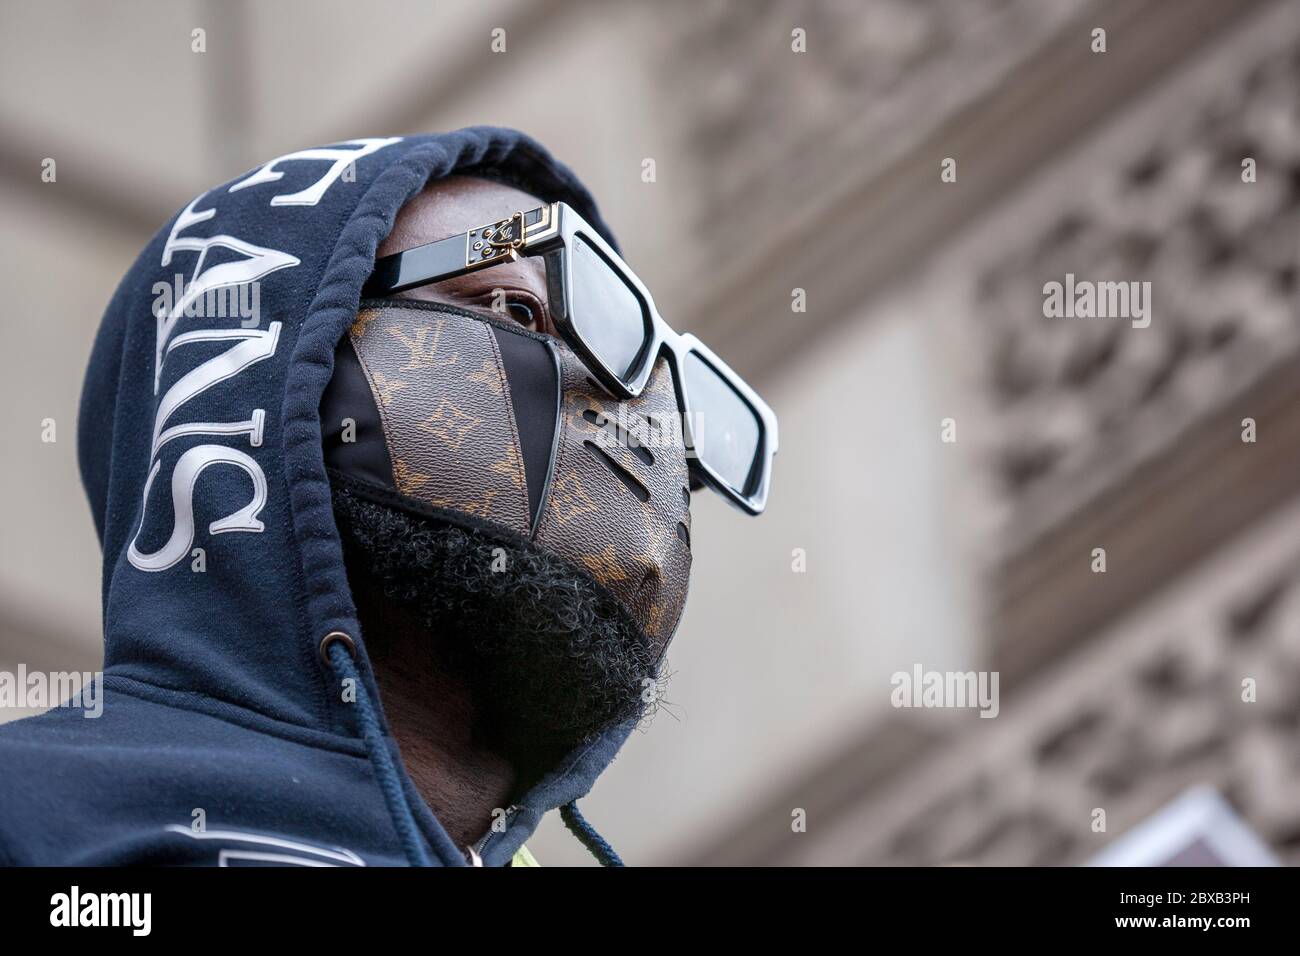 Man wearing a hooded top, sunglasses and Louis Vuitton Face Mask, at the  Black Lives Matter UK protest in Parliament Square. London, England UK  Stock Photo - Alamy